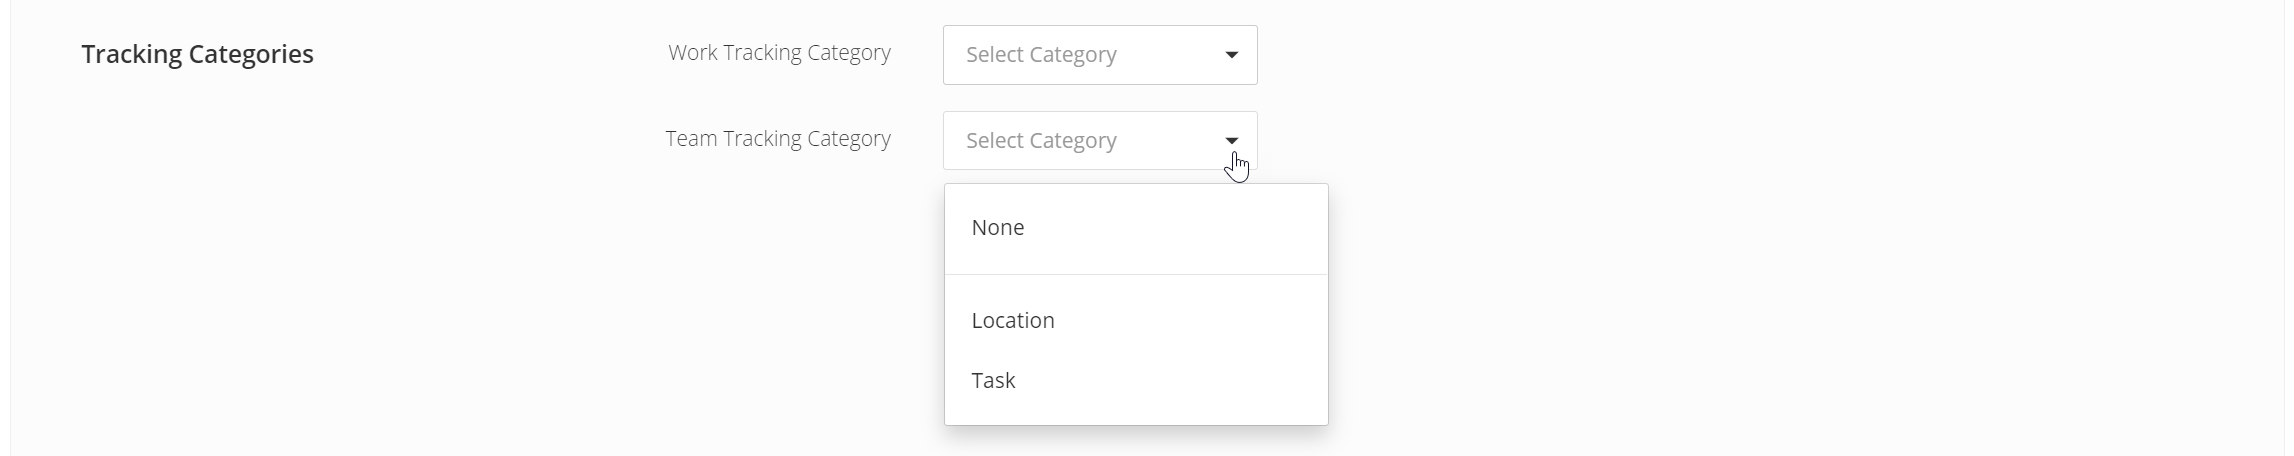 Tracking_Categories_with_Dropdown.png